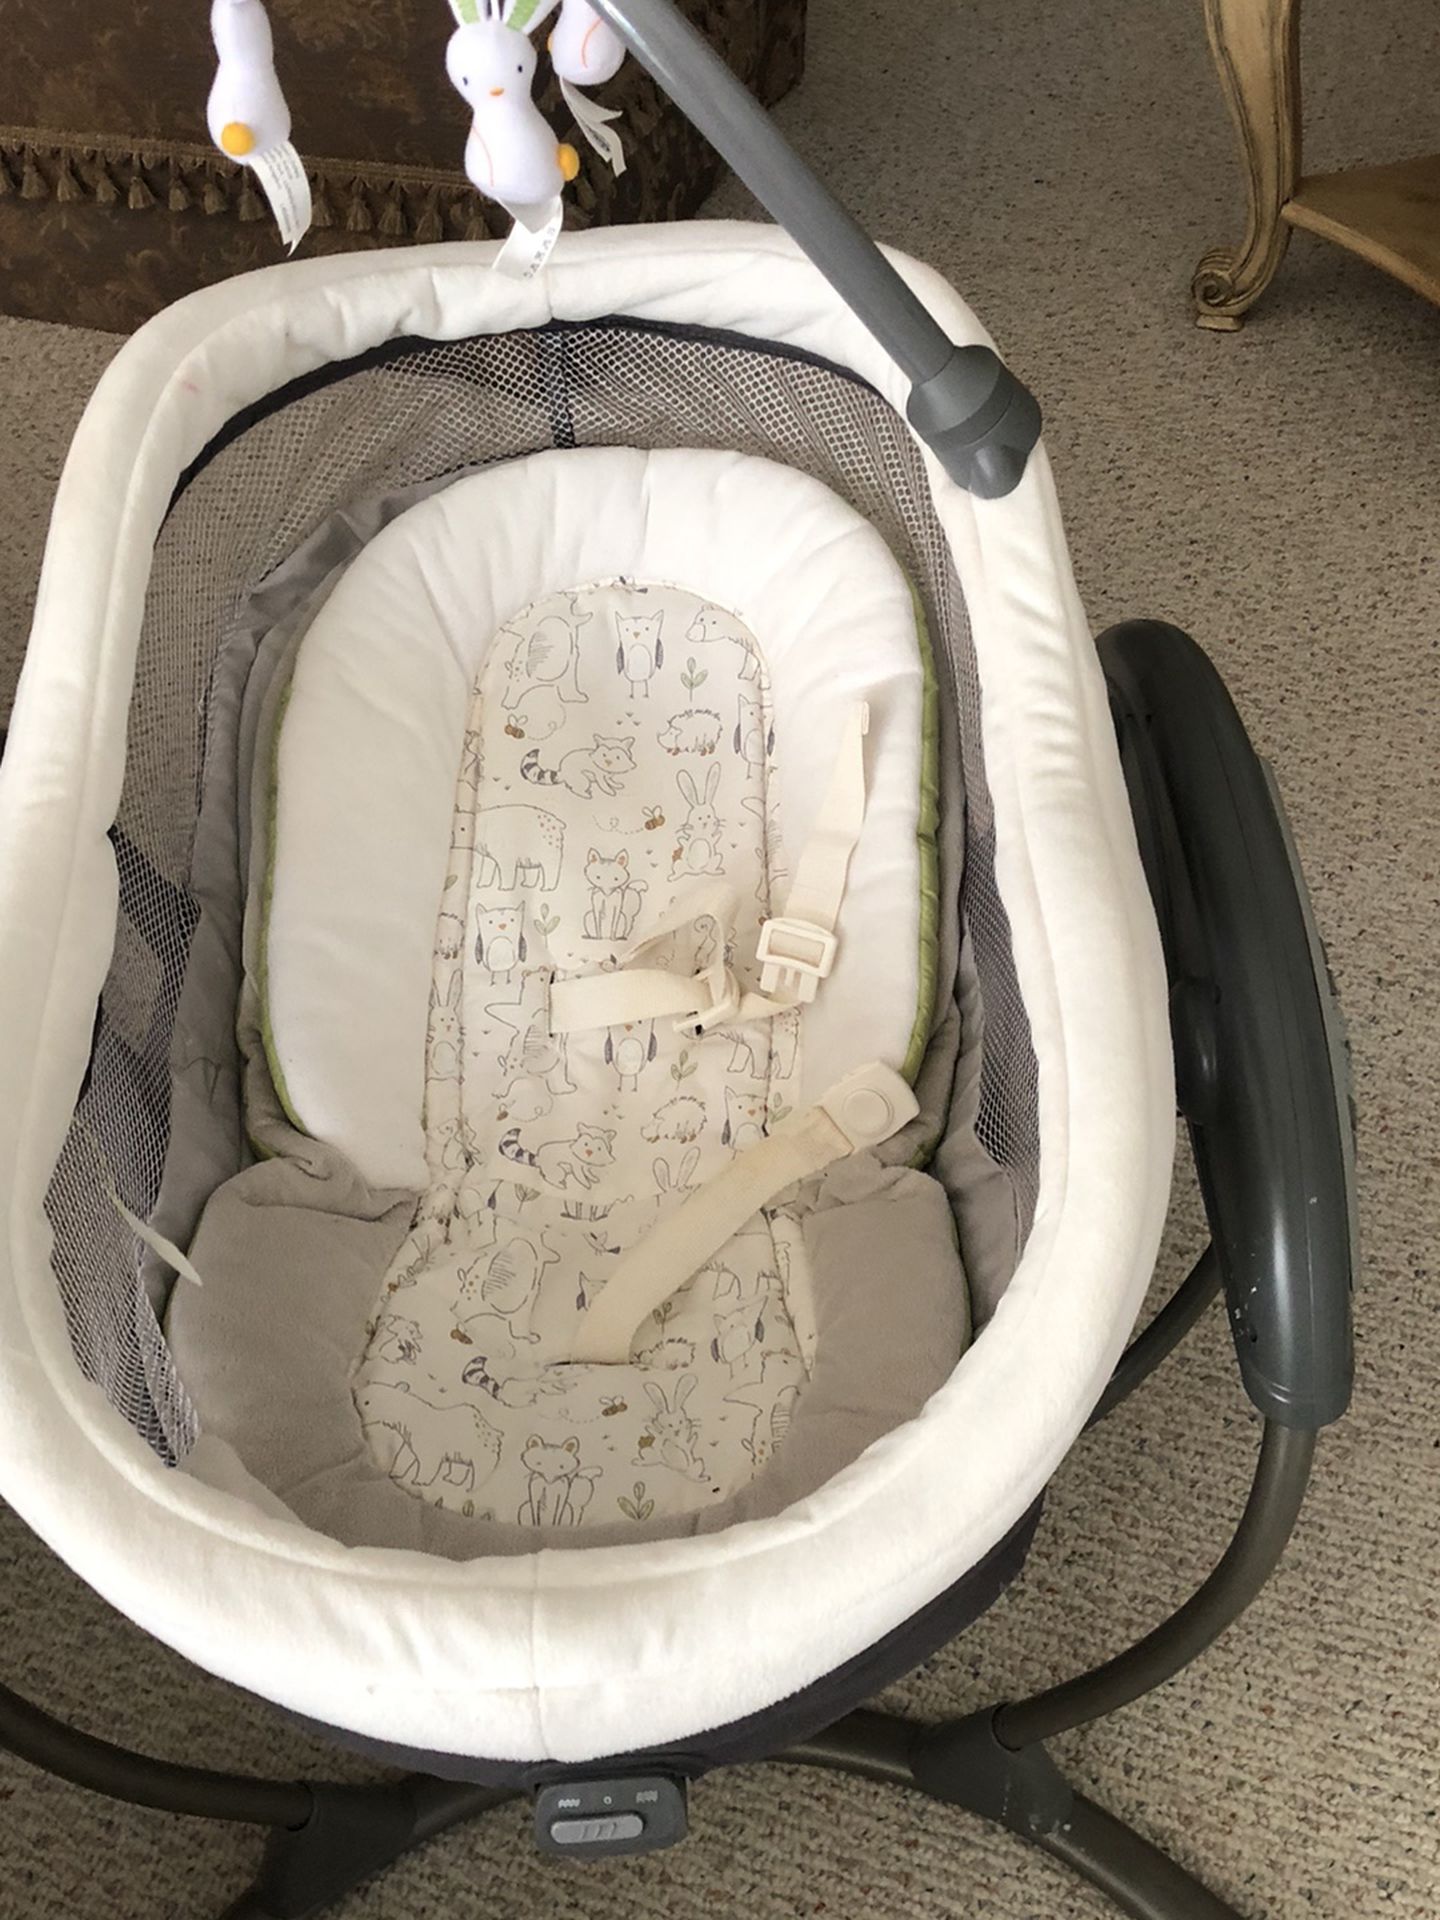 Baby Swinging Bed Great Condition But The Switches. Not Working